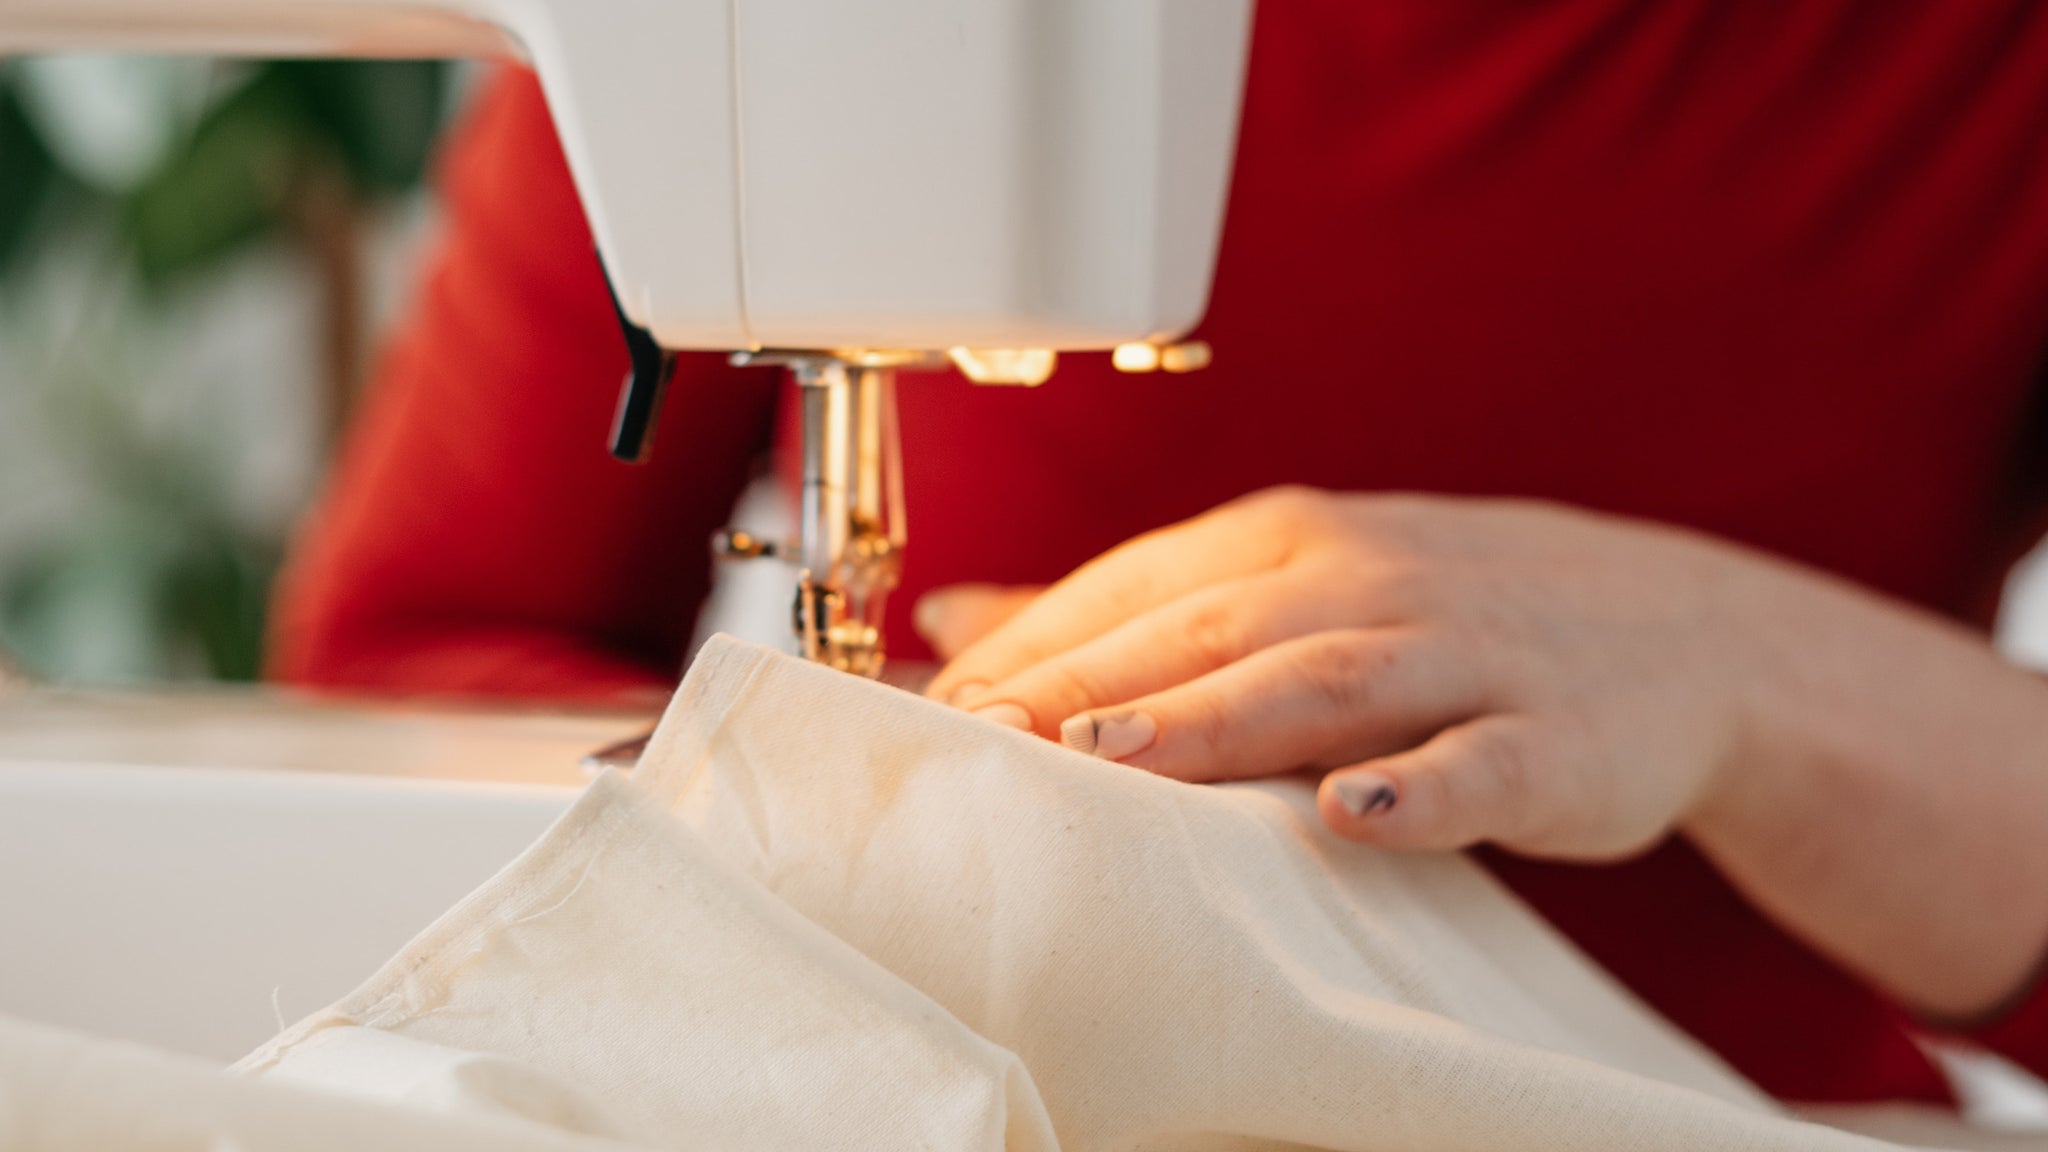 Photo of a woman wearing a red top using a white sewing machine to sew the edge of a cream fabric